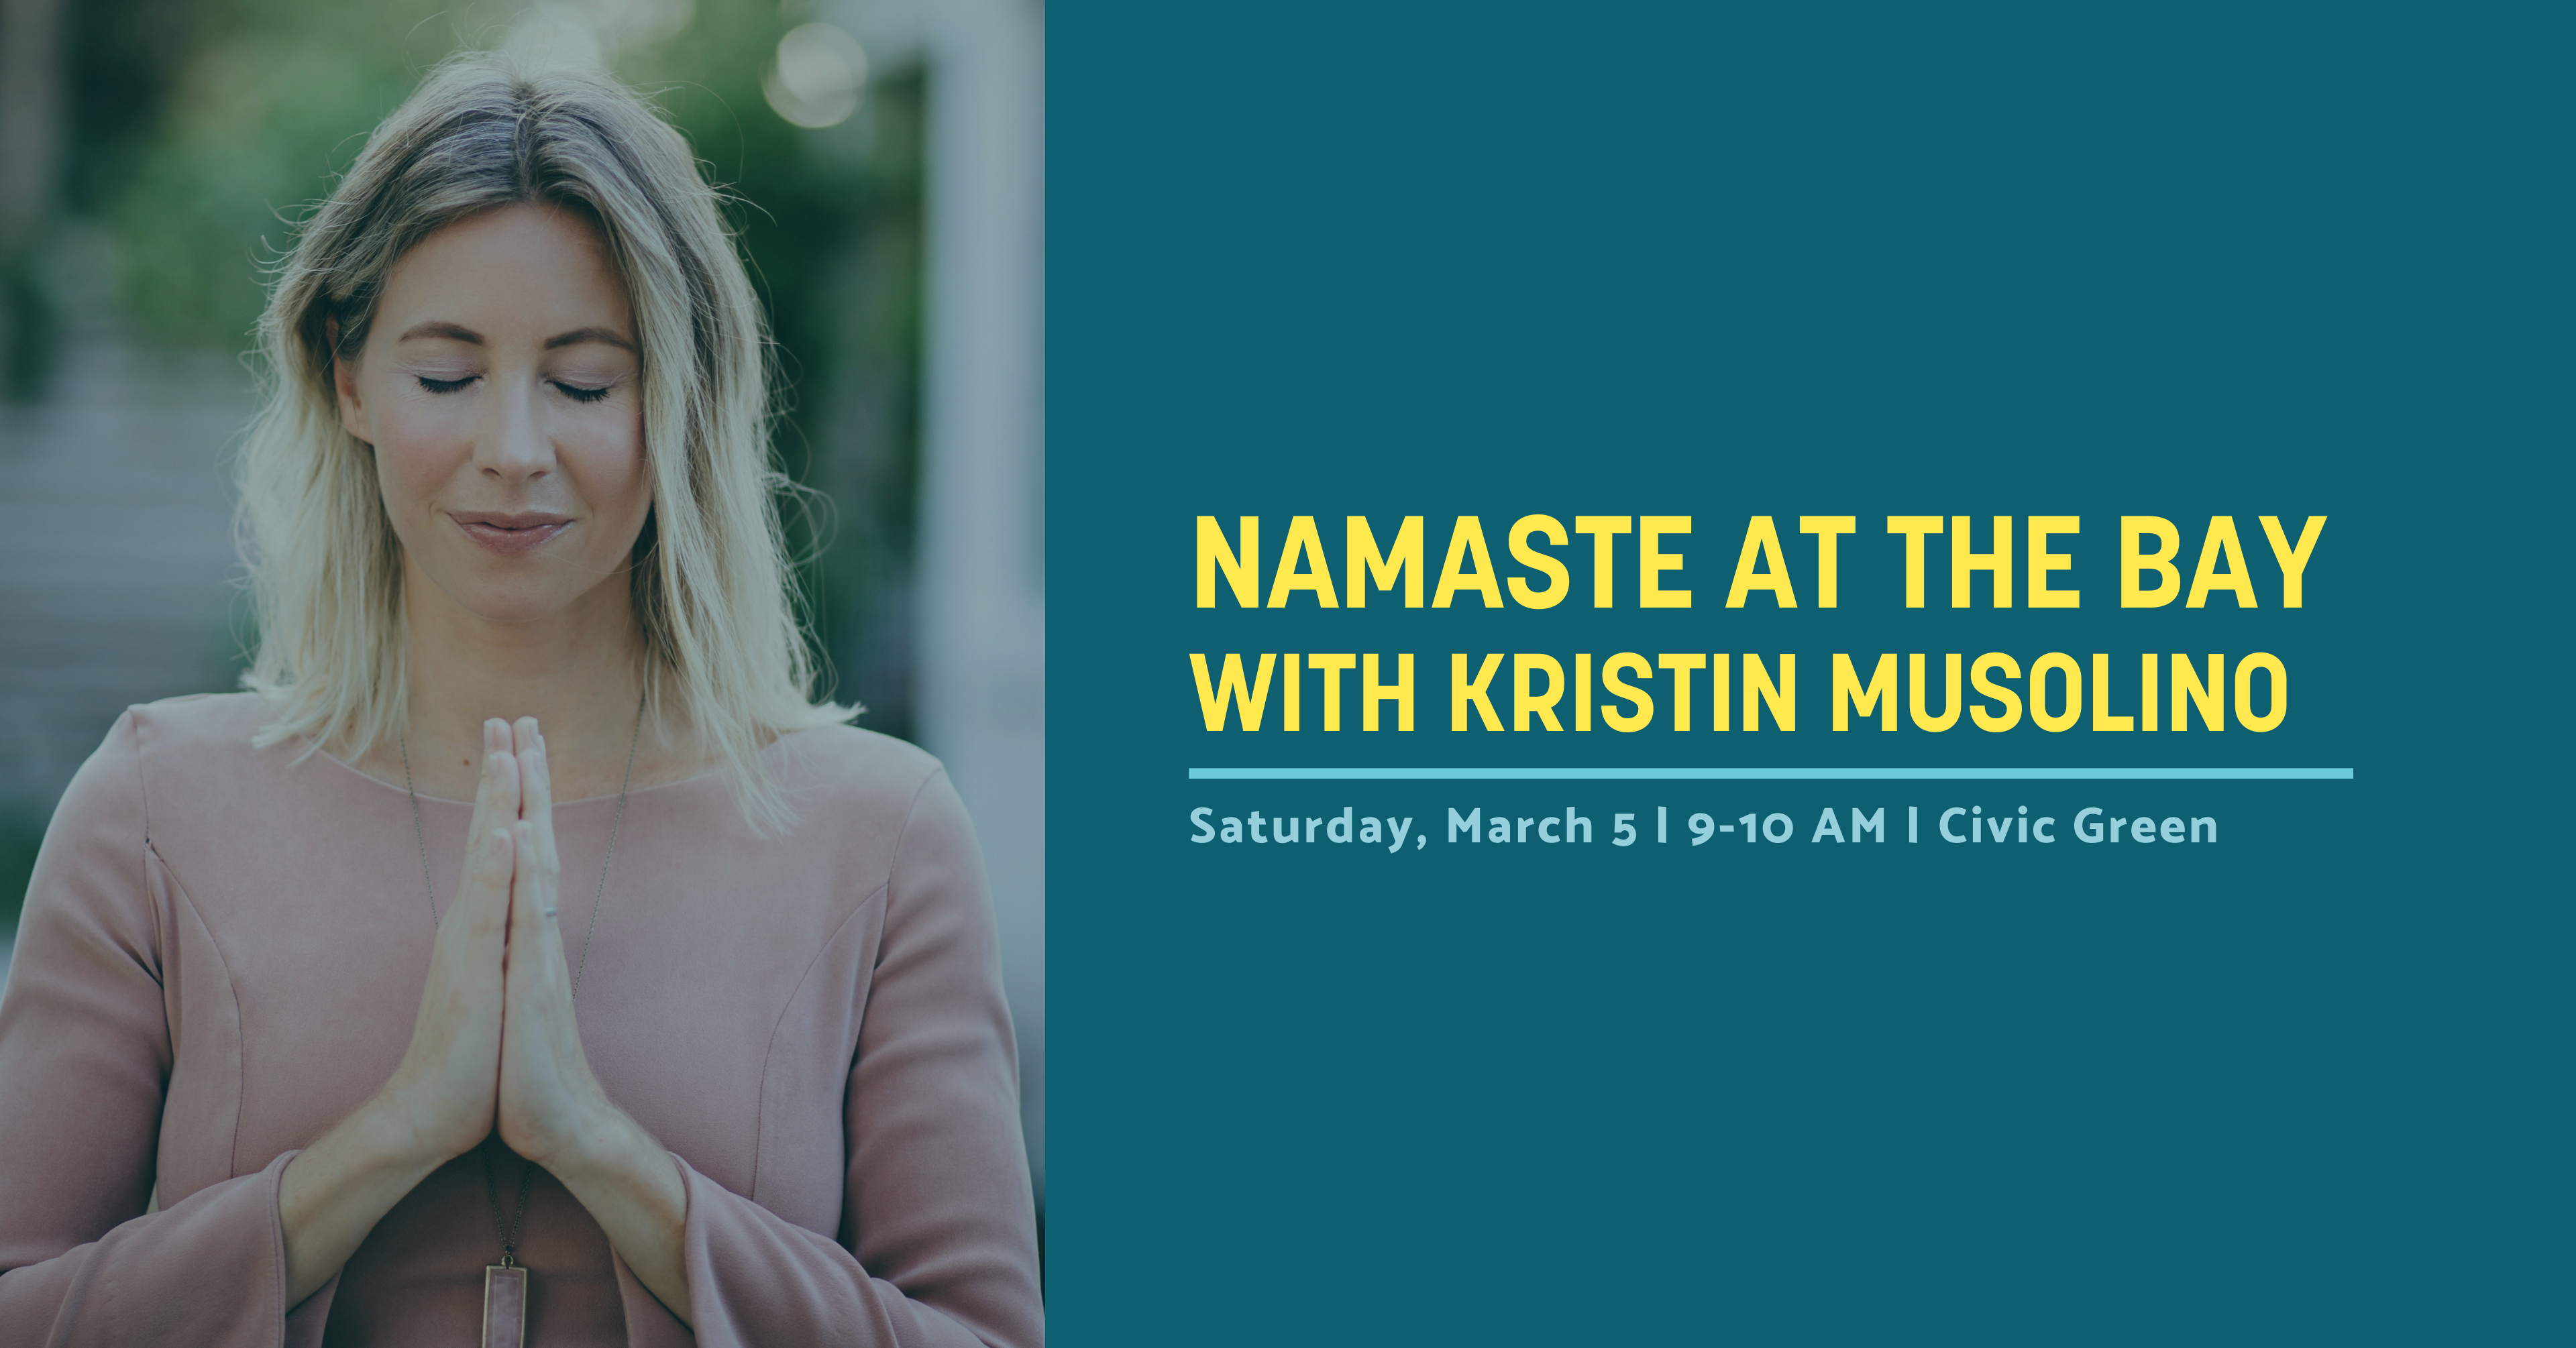 Program info for Namaste at The Bay with Kristen Musolino on March 5, 2022 at The Bay Civic Green from 9-10AM